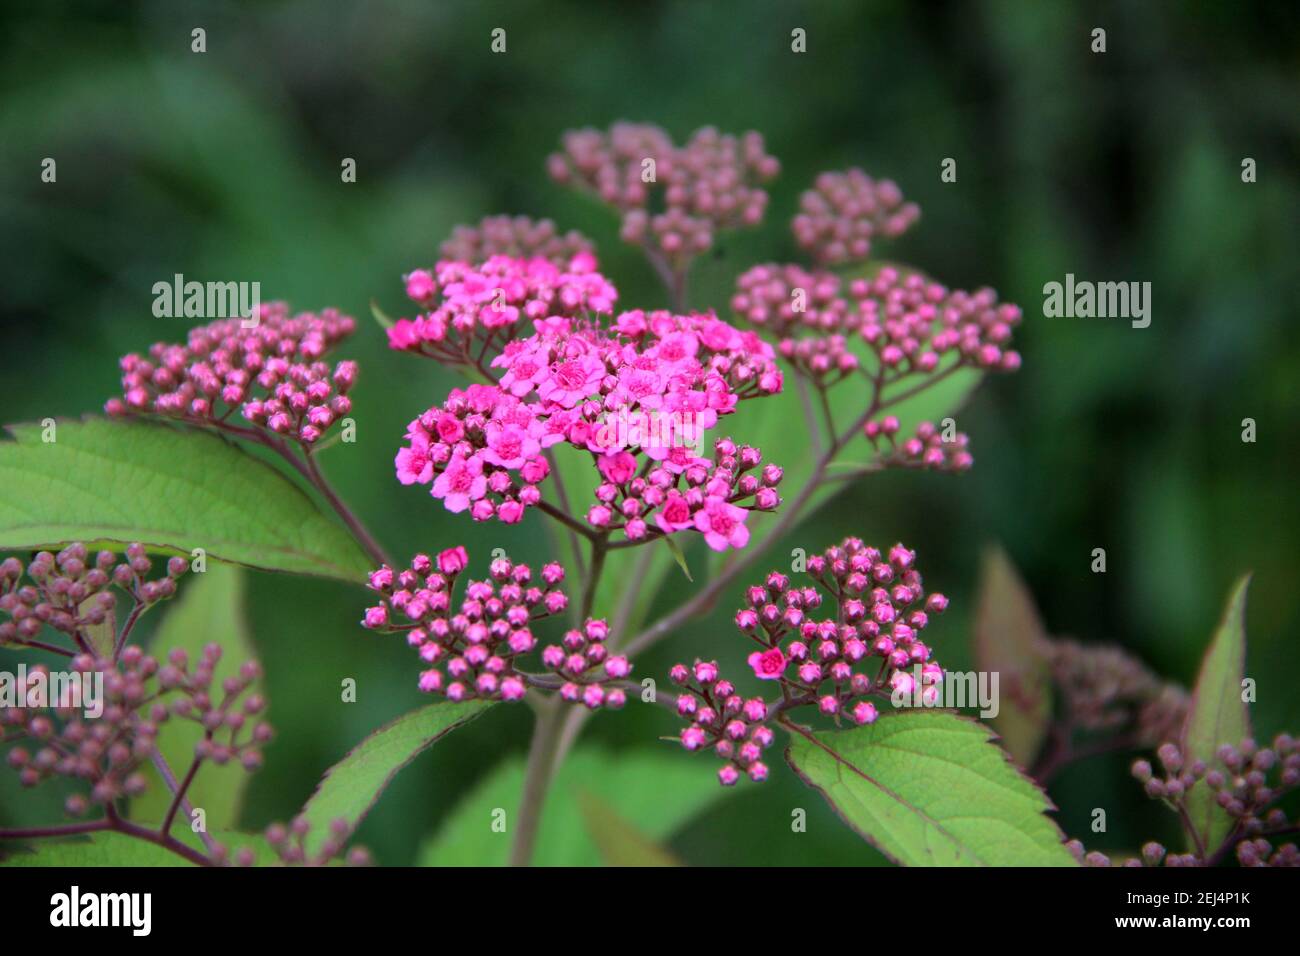 Lilac branch close-up. Pink flowers on a background of green leaves. Stock Photo